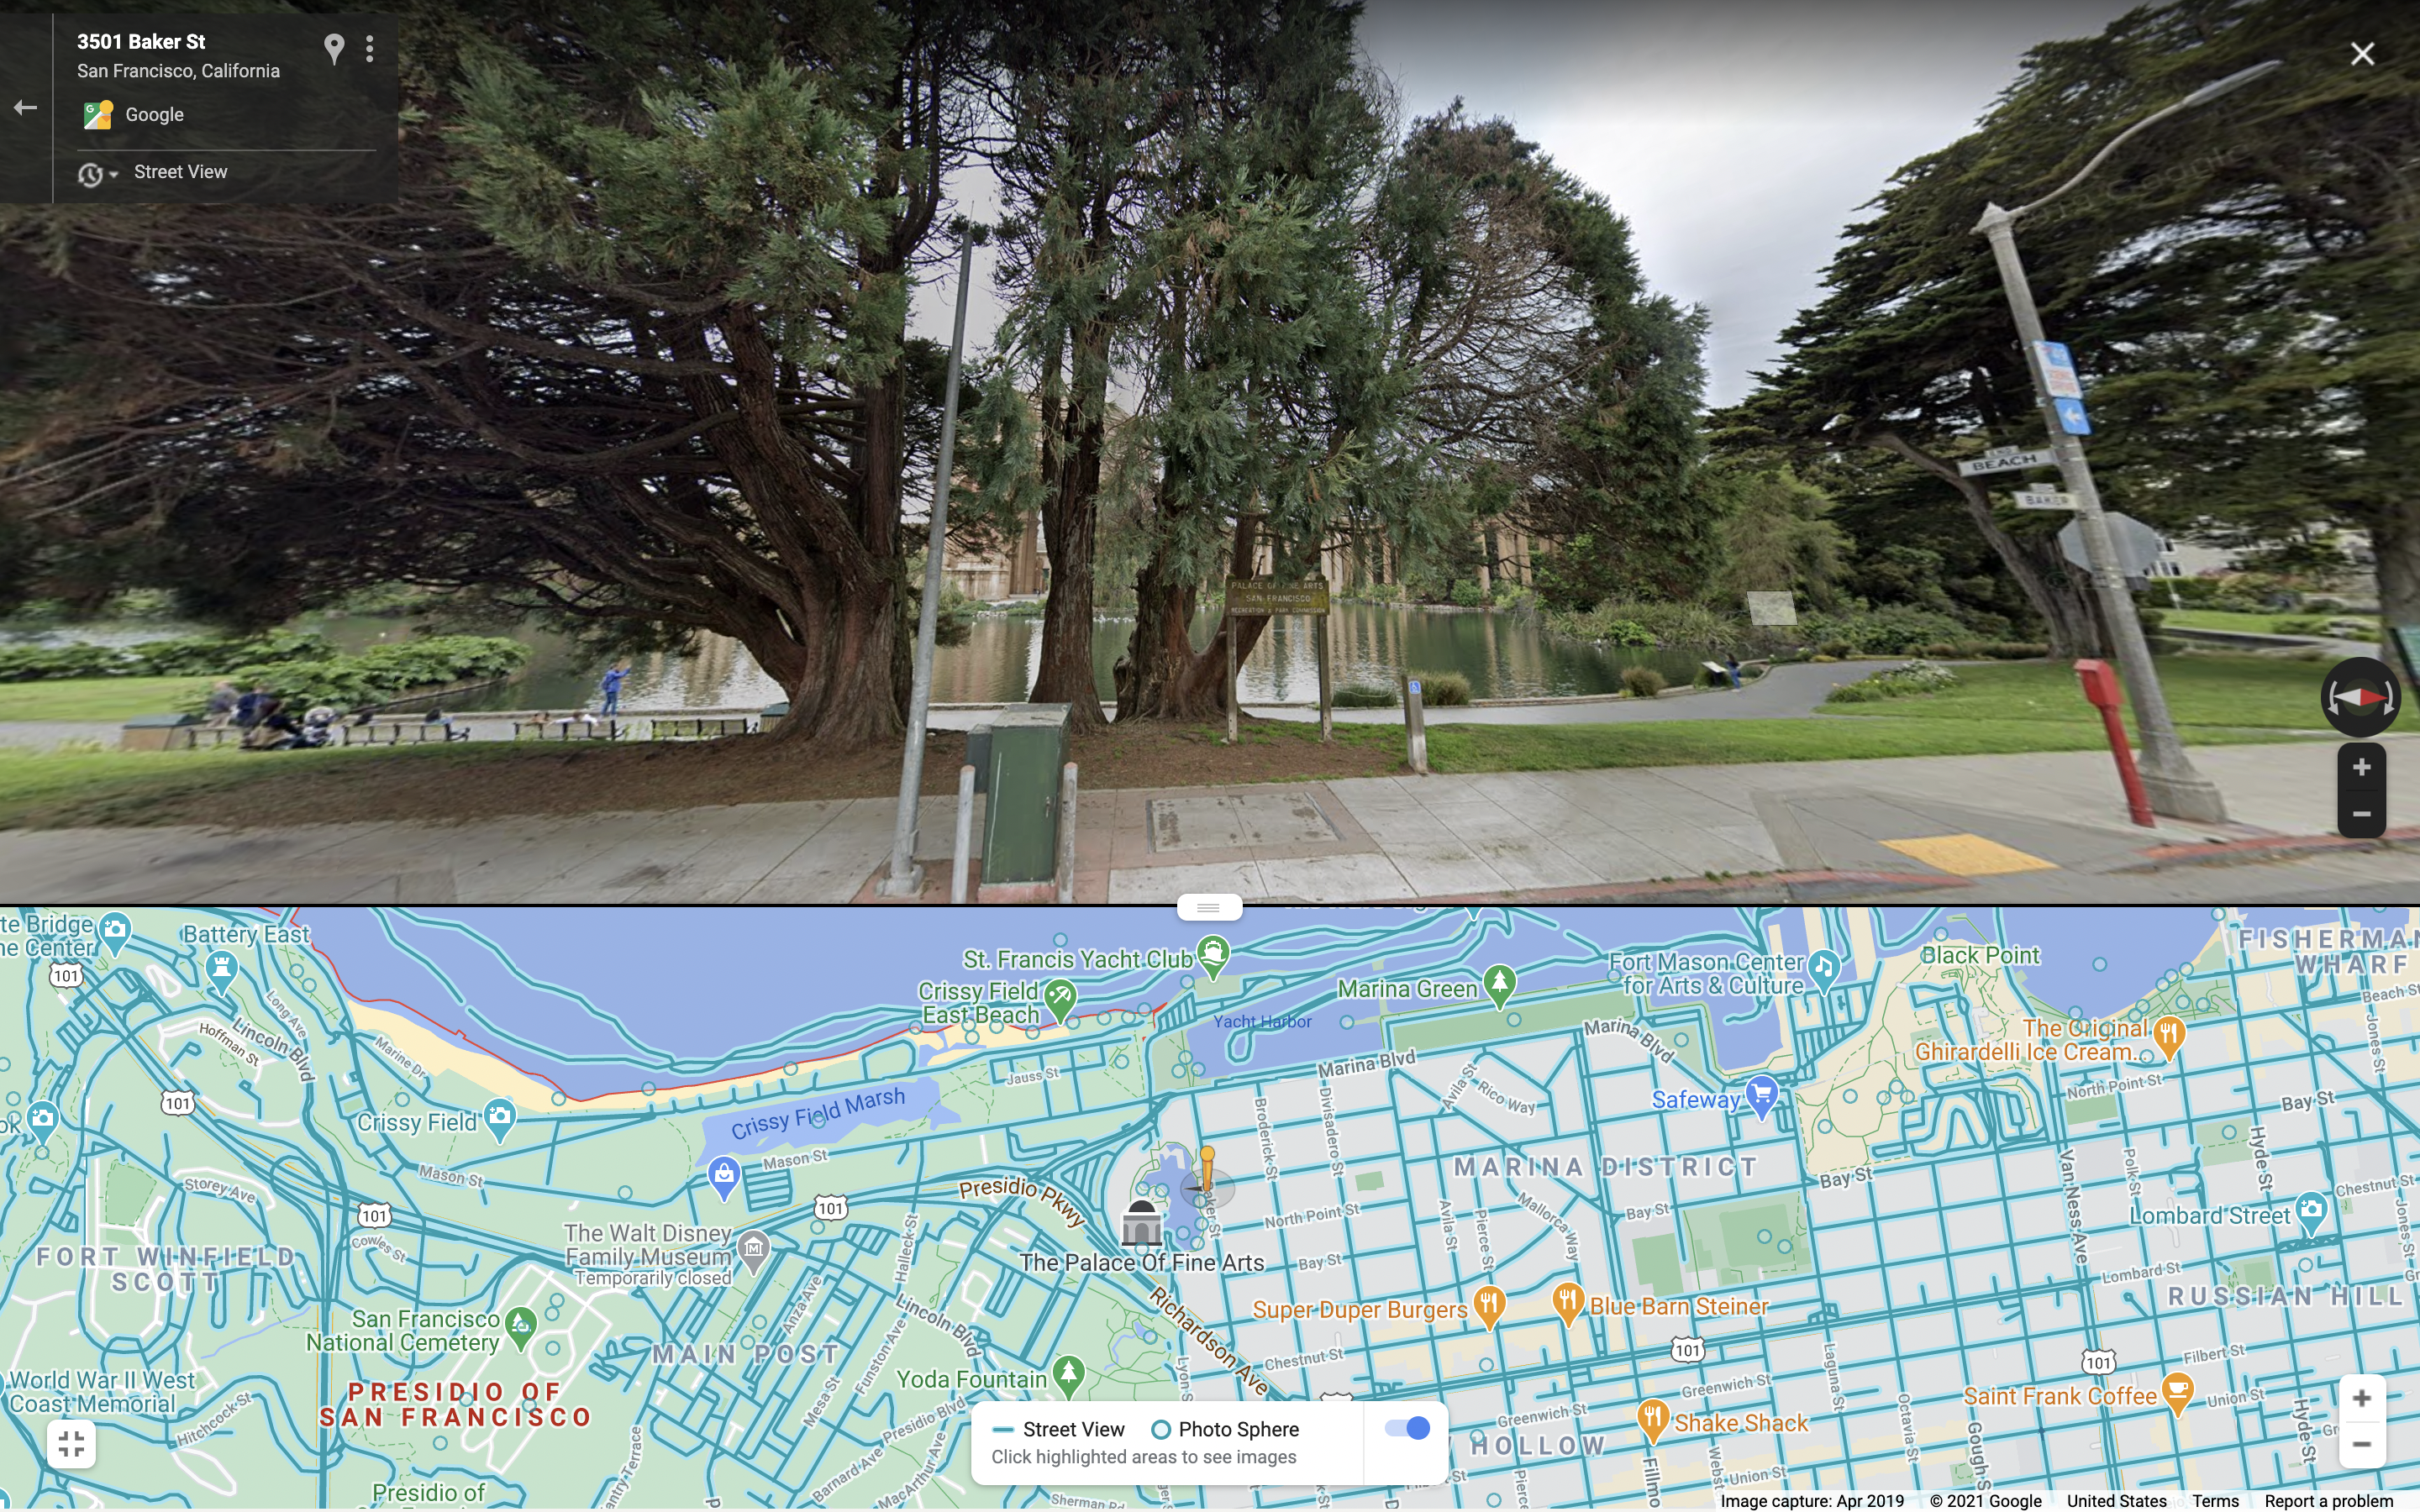 google maps street view gets split screen ui on android - 9to5google